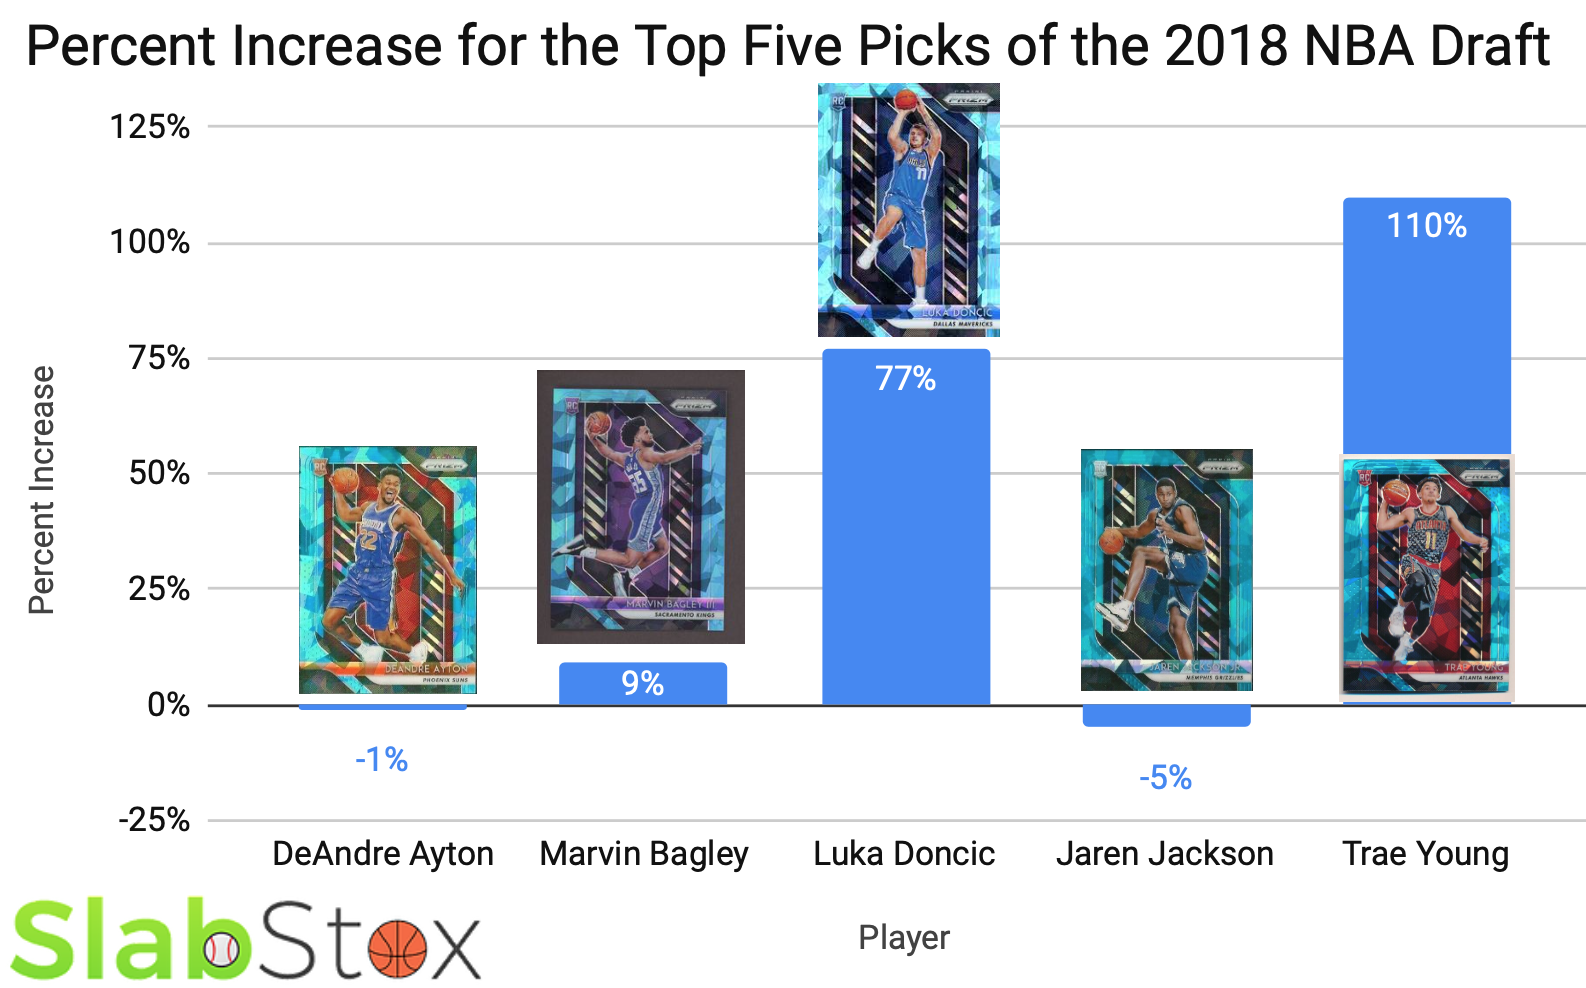 SlabStox infographic for percent increase for the top five picks of the 2018 NBA draft